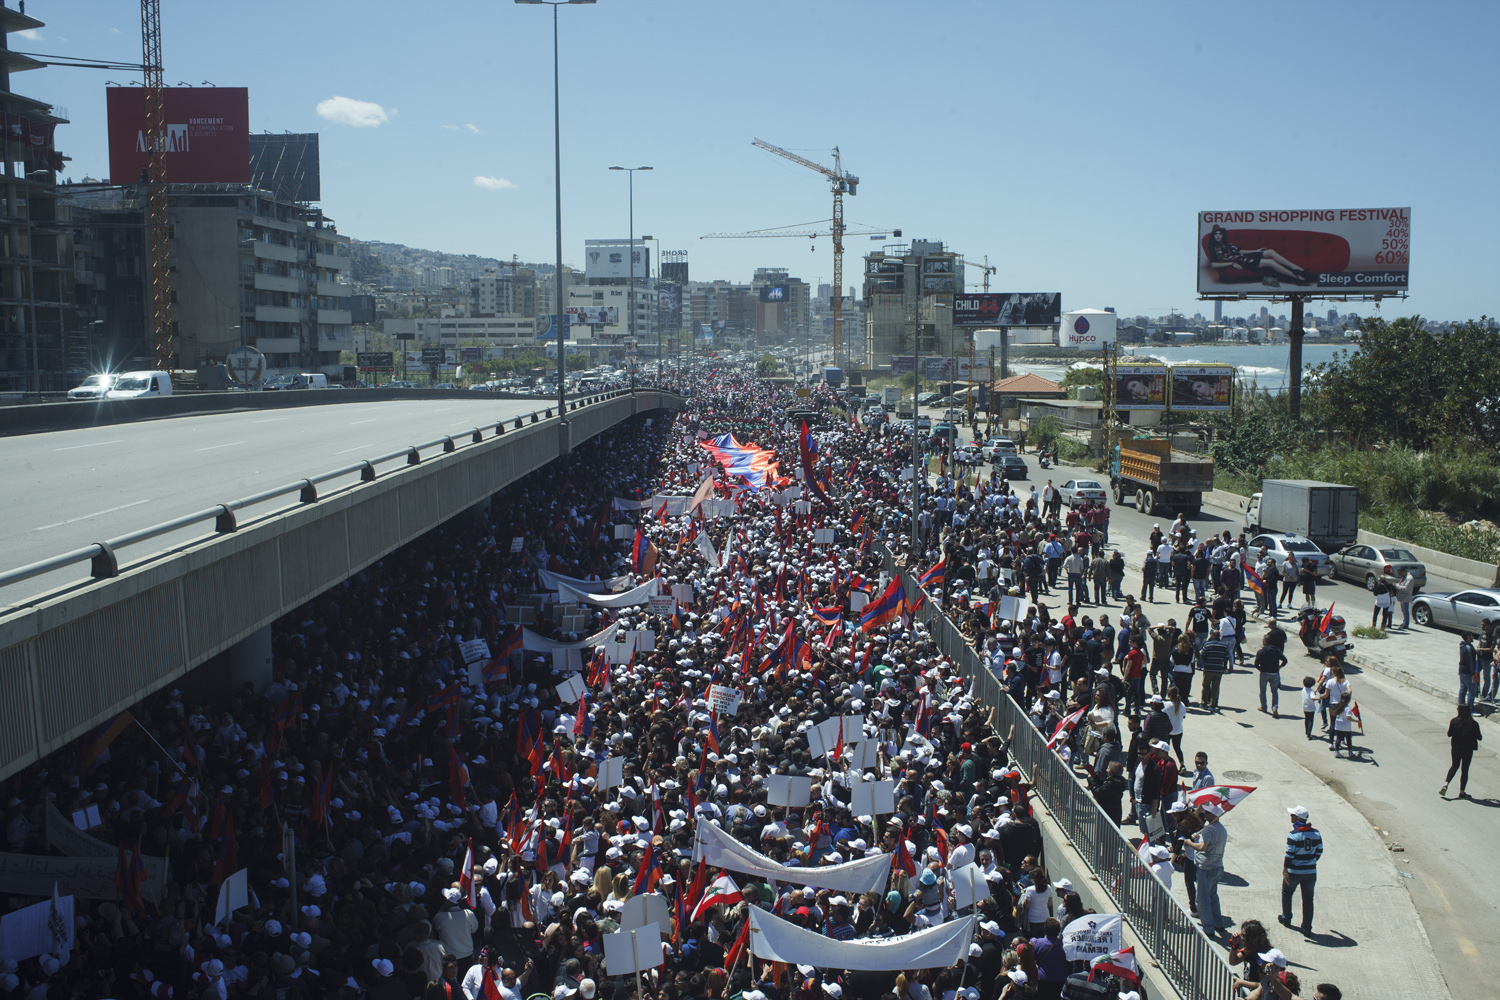 Lebanese Armenians and supporters marched on April 24th. Photo by Paul Gorra.